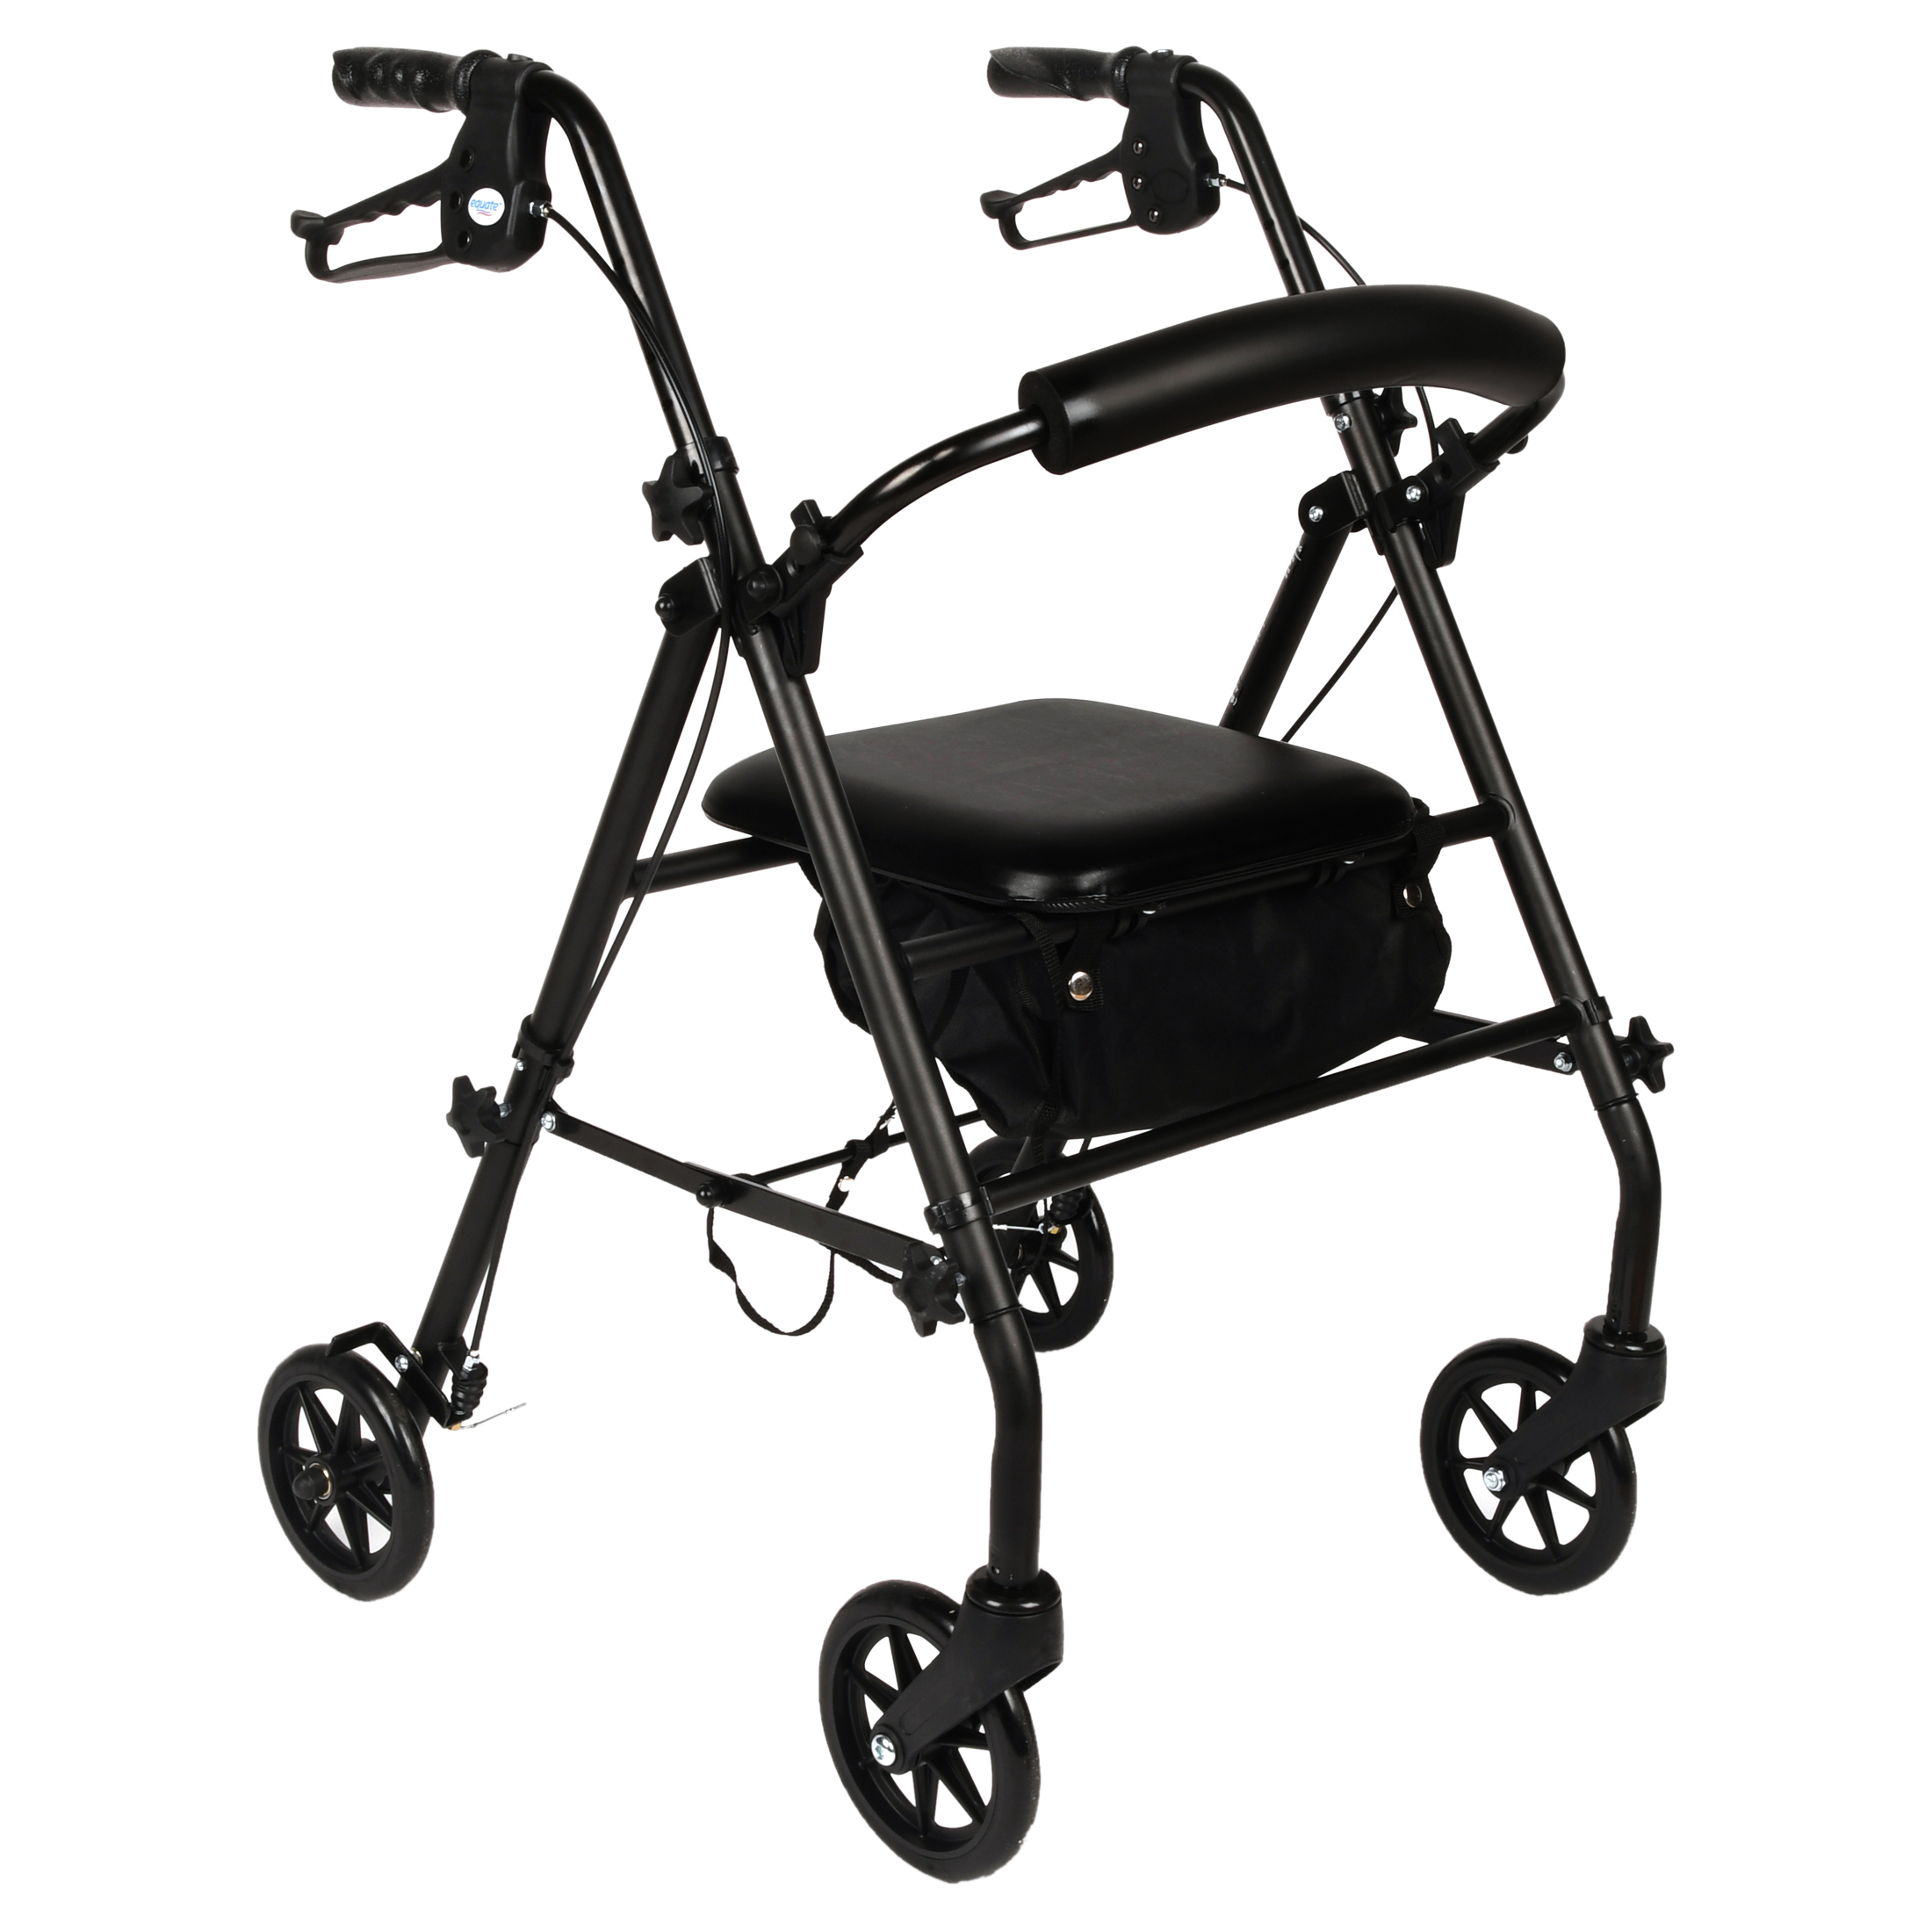 Equate Rolling Walker for Seniors, Rollator with Seat and Wheels, Black, 350 lb Capacity - image 1 of 9